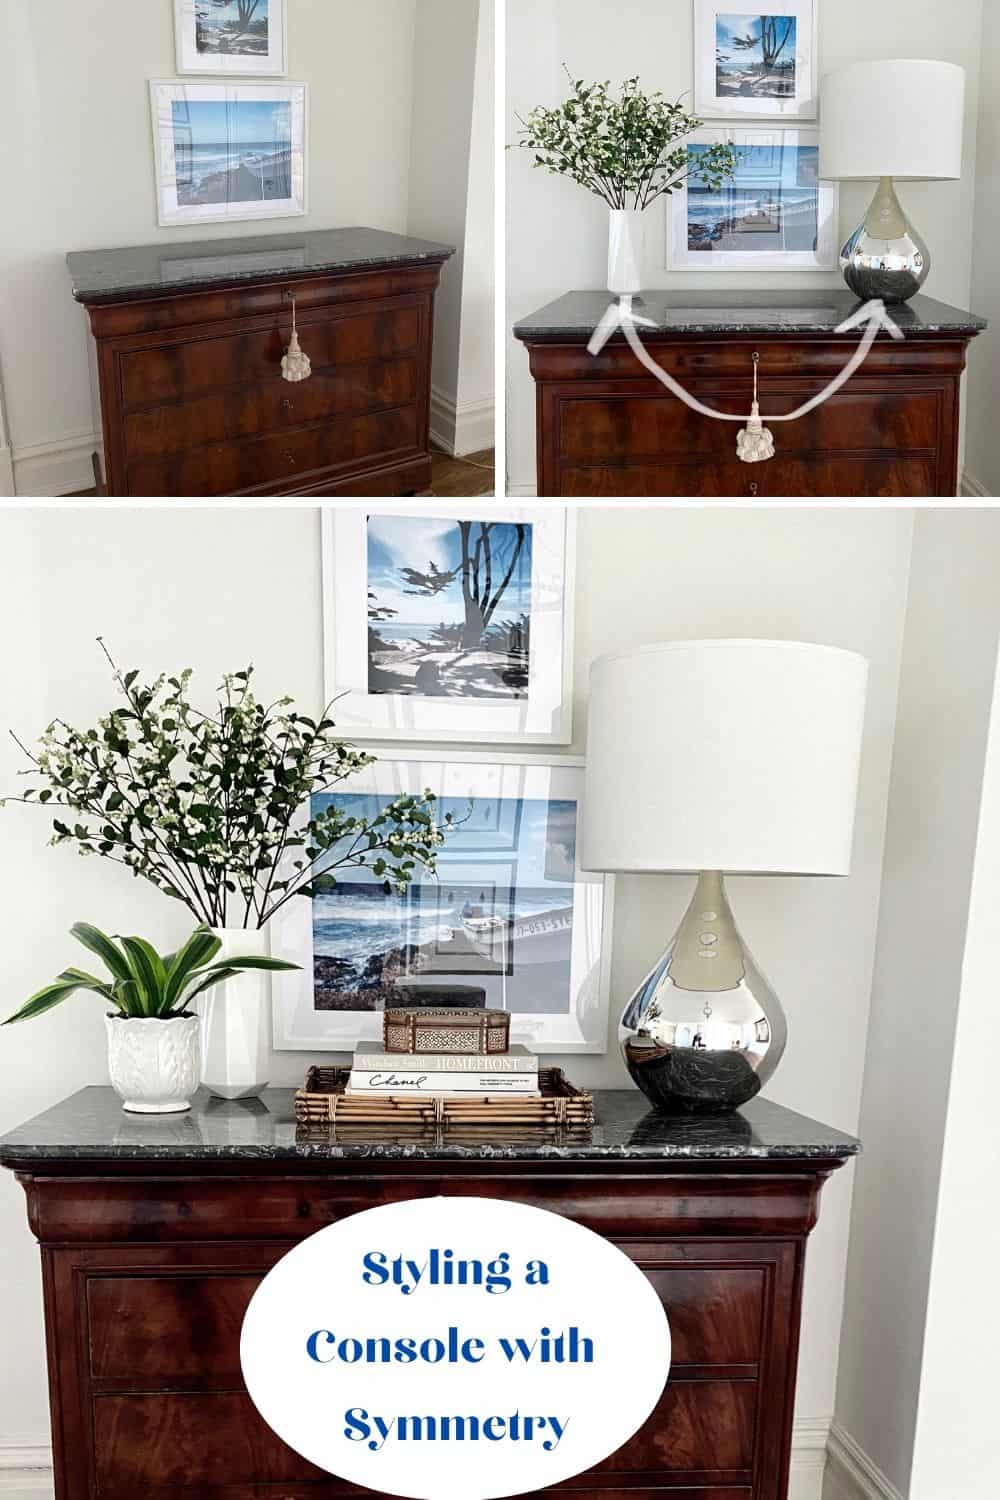 How to decorate an antique chest